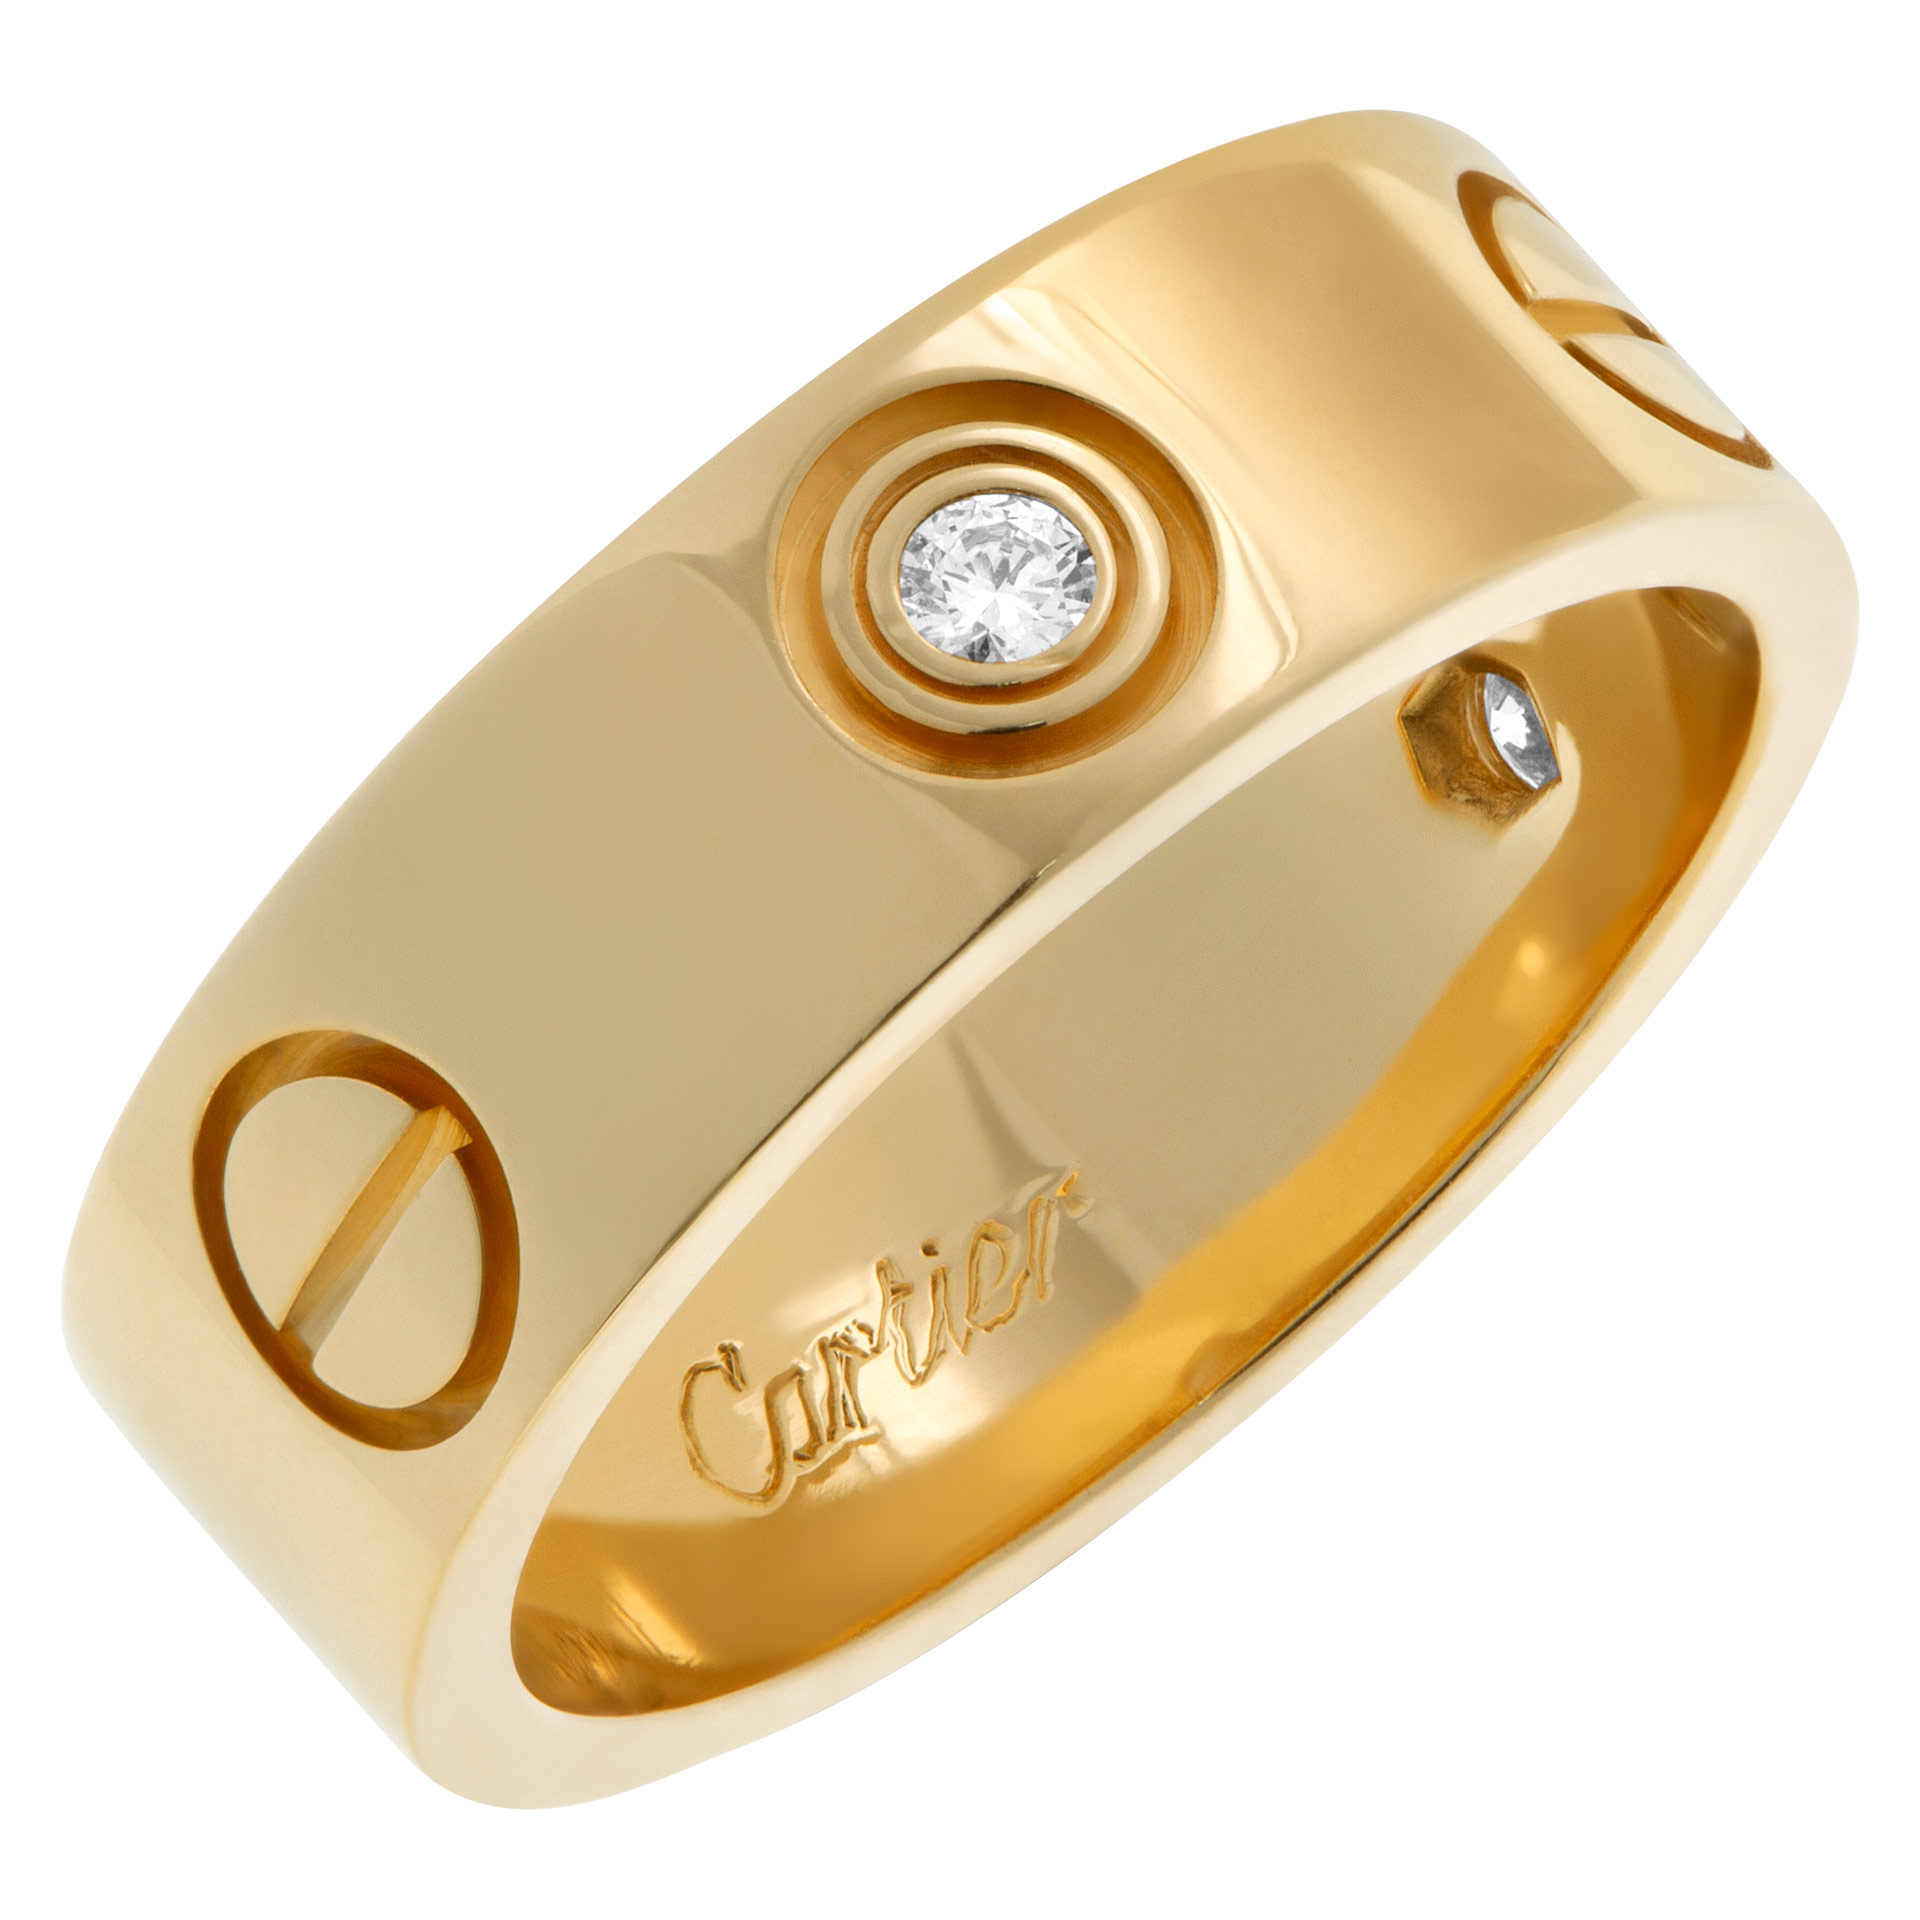 Cartier Love ring in 18k yellow gold 